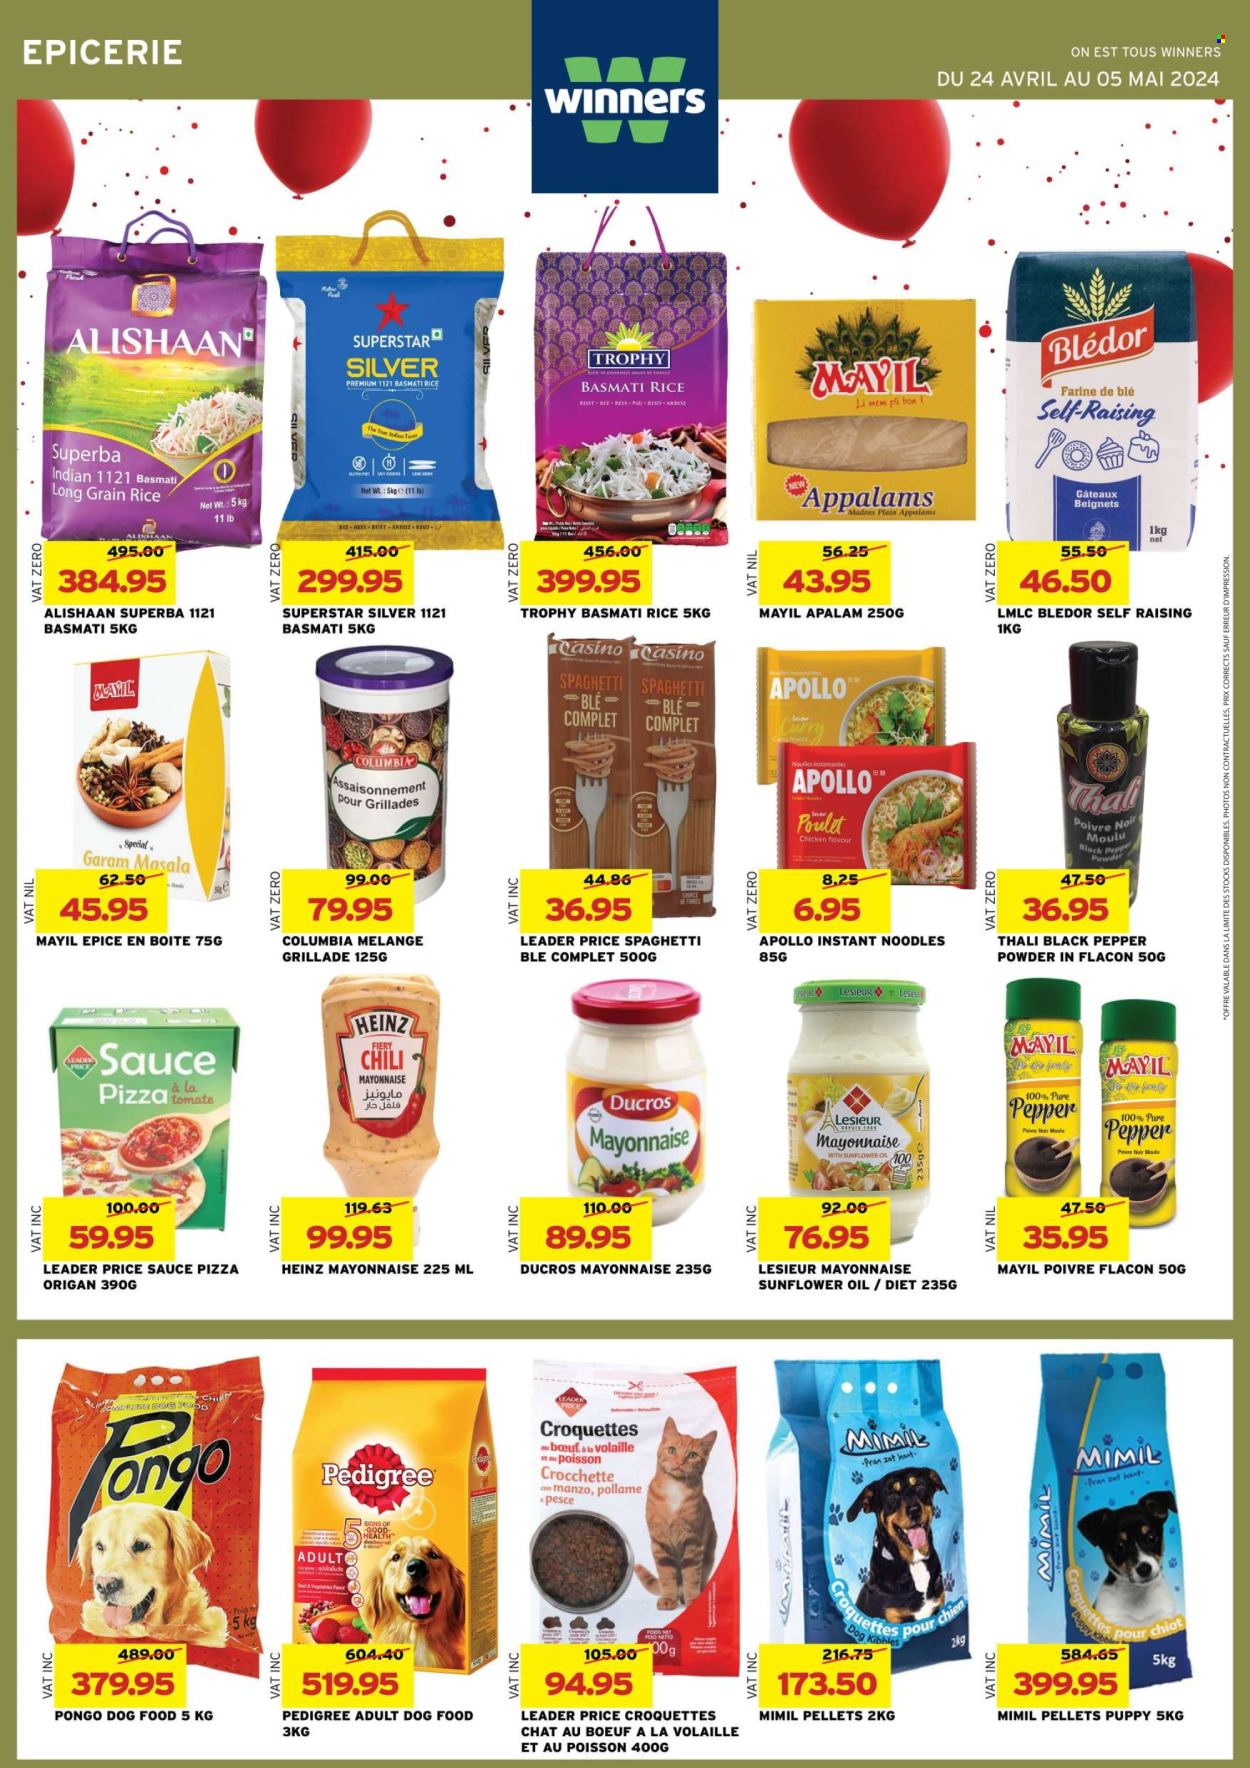 thumbnail - Winner's Catalogue - 24.04.2024 - 5.05.2024 - Sales products - spaghetti, pizza, pasta, instant noodles, noodles, mayonnaise, croquettes, basmati rice, rice, long grain rice, black pepper, oil, pot, animal food, dog food, Pedigree, Heinz. Page 31.